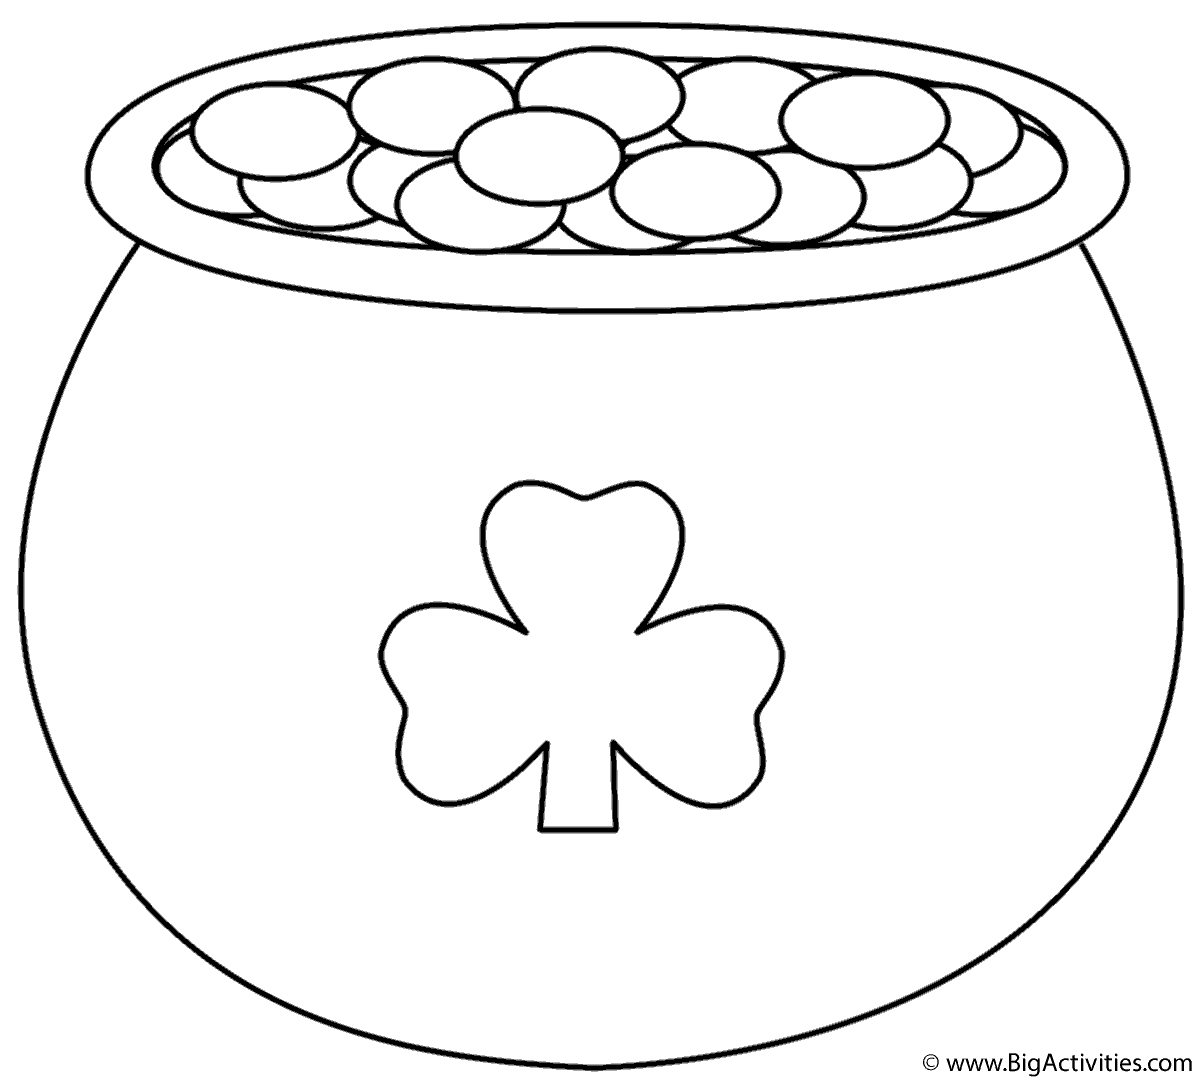 Pot of Gold with Shamrock - Coloring Page (St. Patrick's Day)